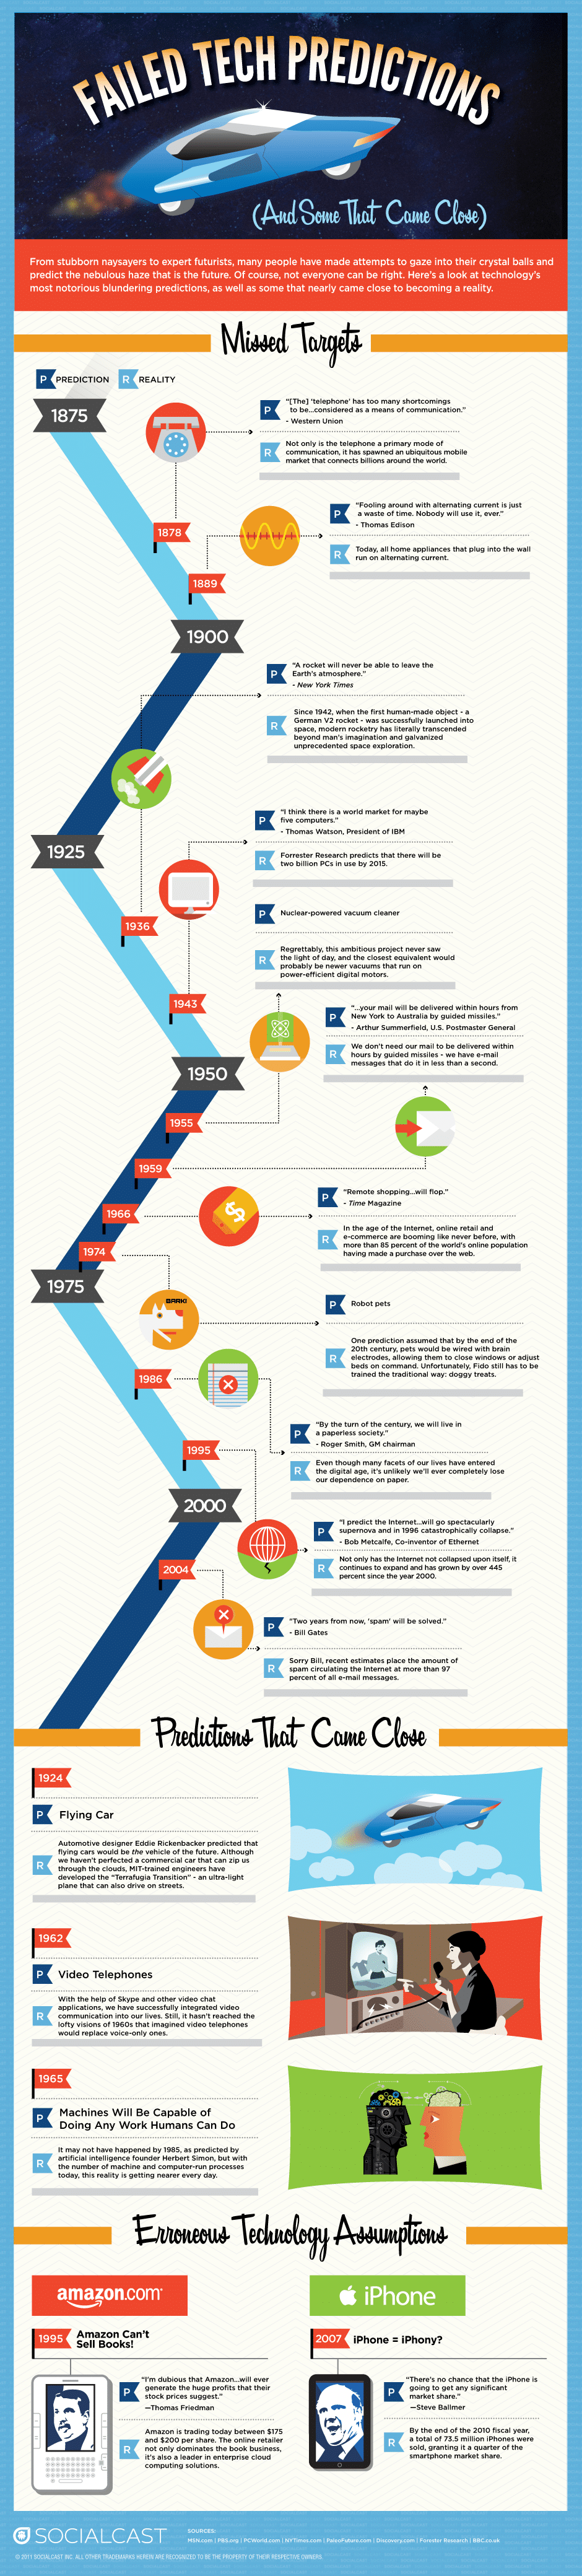 Failed Tech Predictions Timeline Infographic